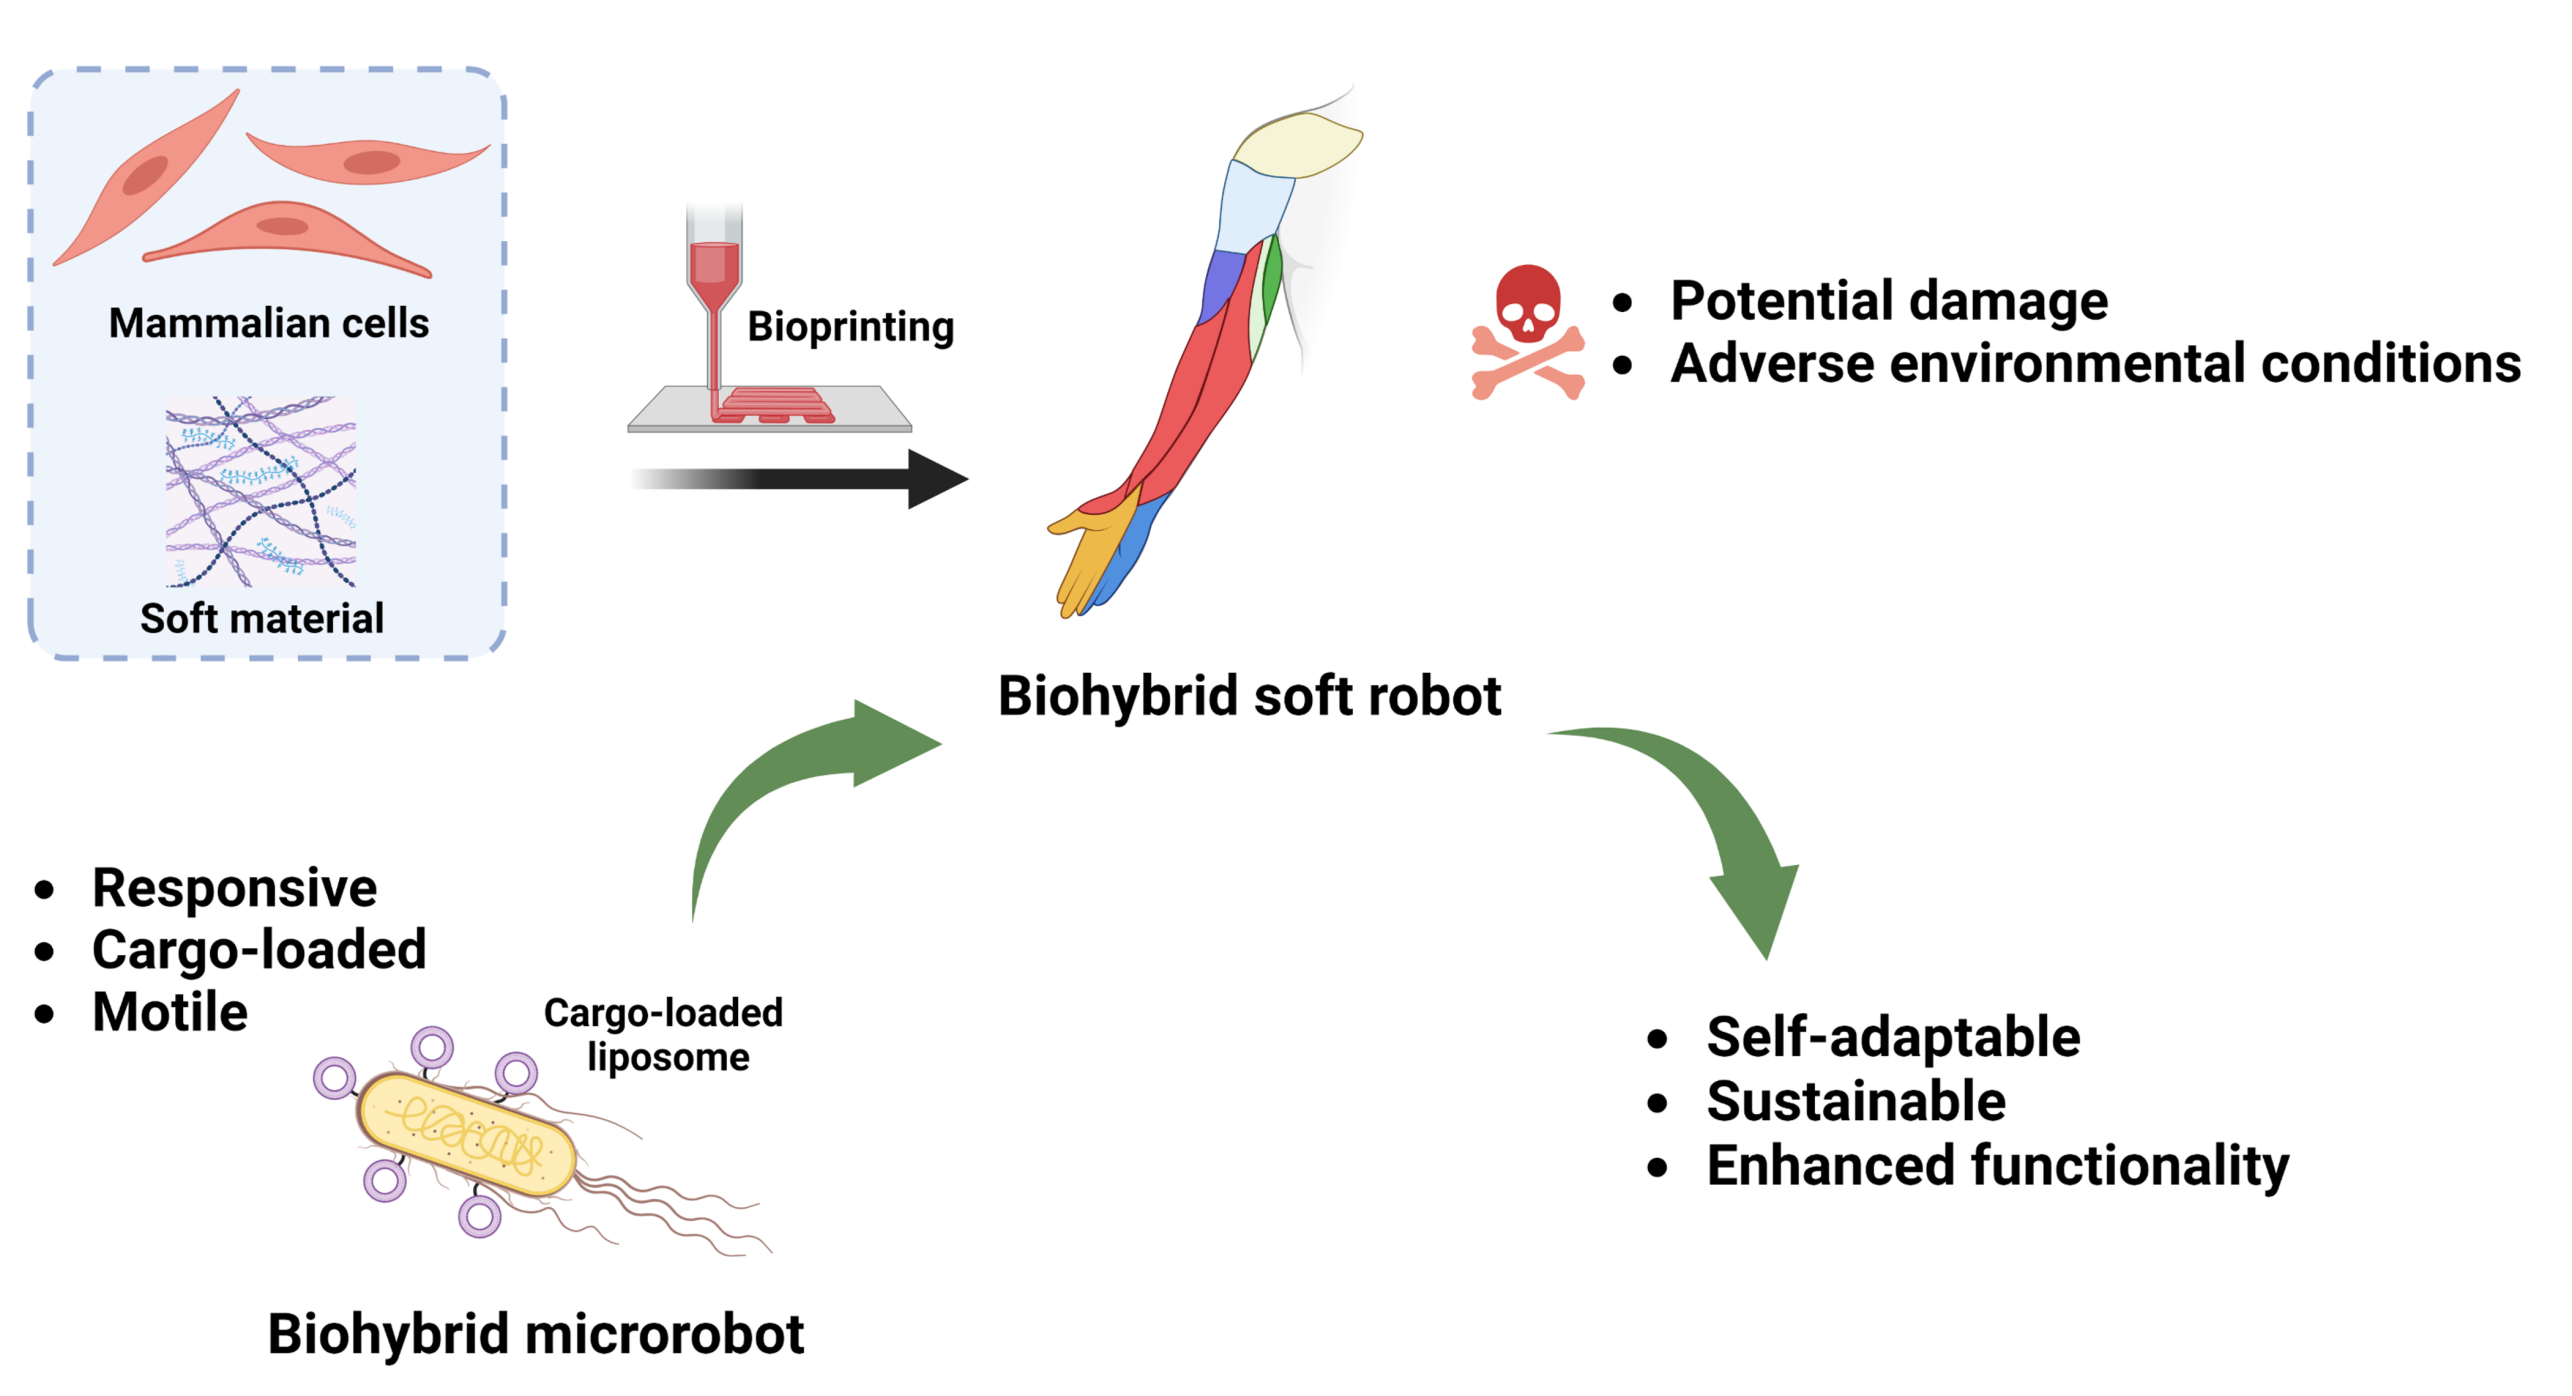 Biohybrid microrobots for damage detection and repair in large scale biohybrid systems